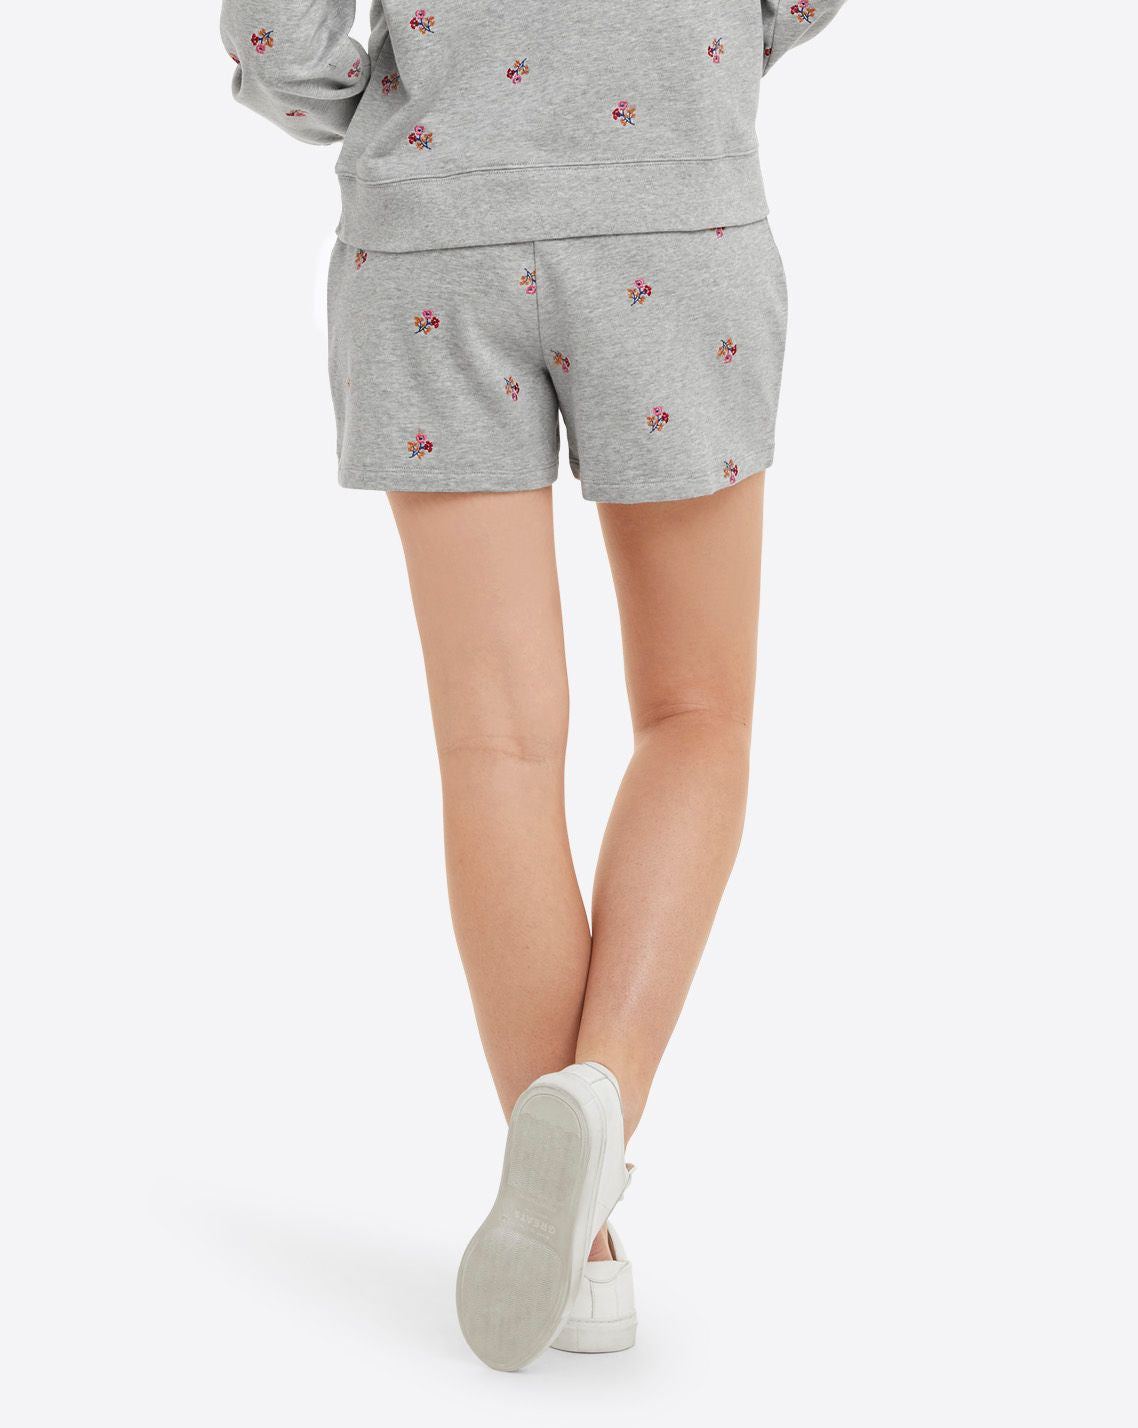 Natalie Sweat Shorts in Embroidered Viola